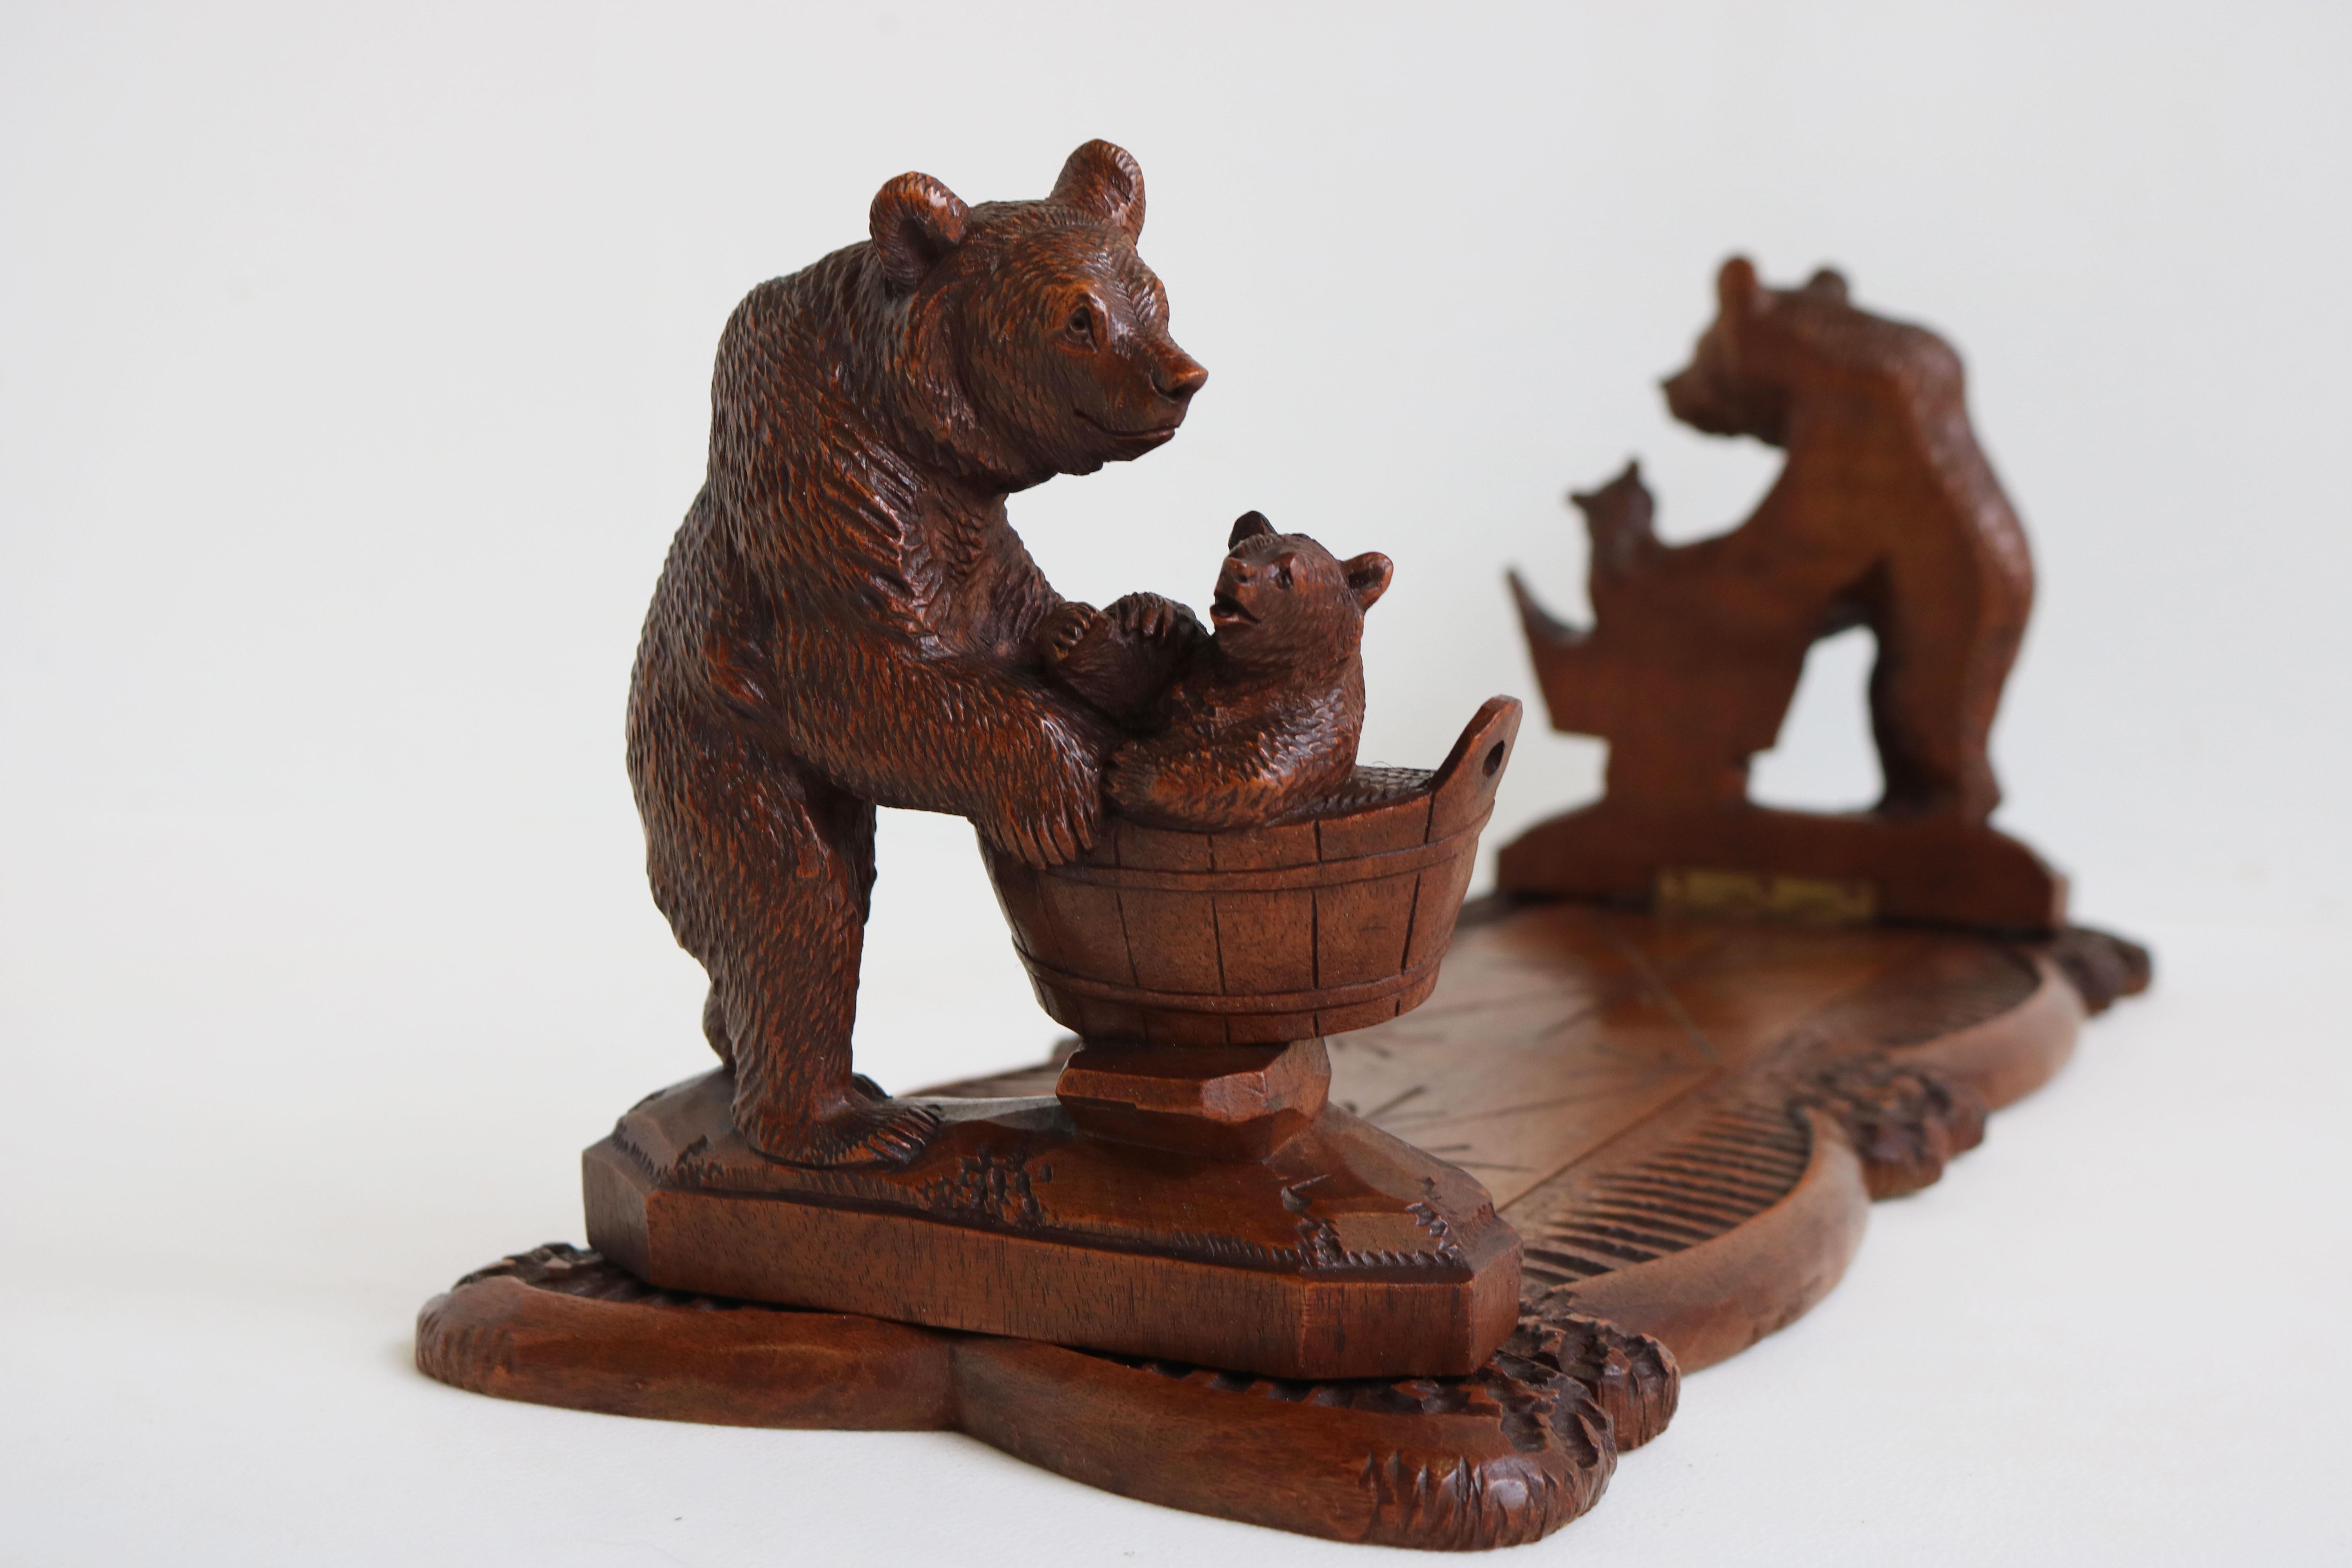 Exquisite & rare! This 19th century black forest books rack/ book shelf with ''Bears holding baby bears'' bookends hand carved Swiss.

Gorgeous 19th century antique Black Forest bookstand with sliding and folding bookends, hand carved from